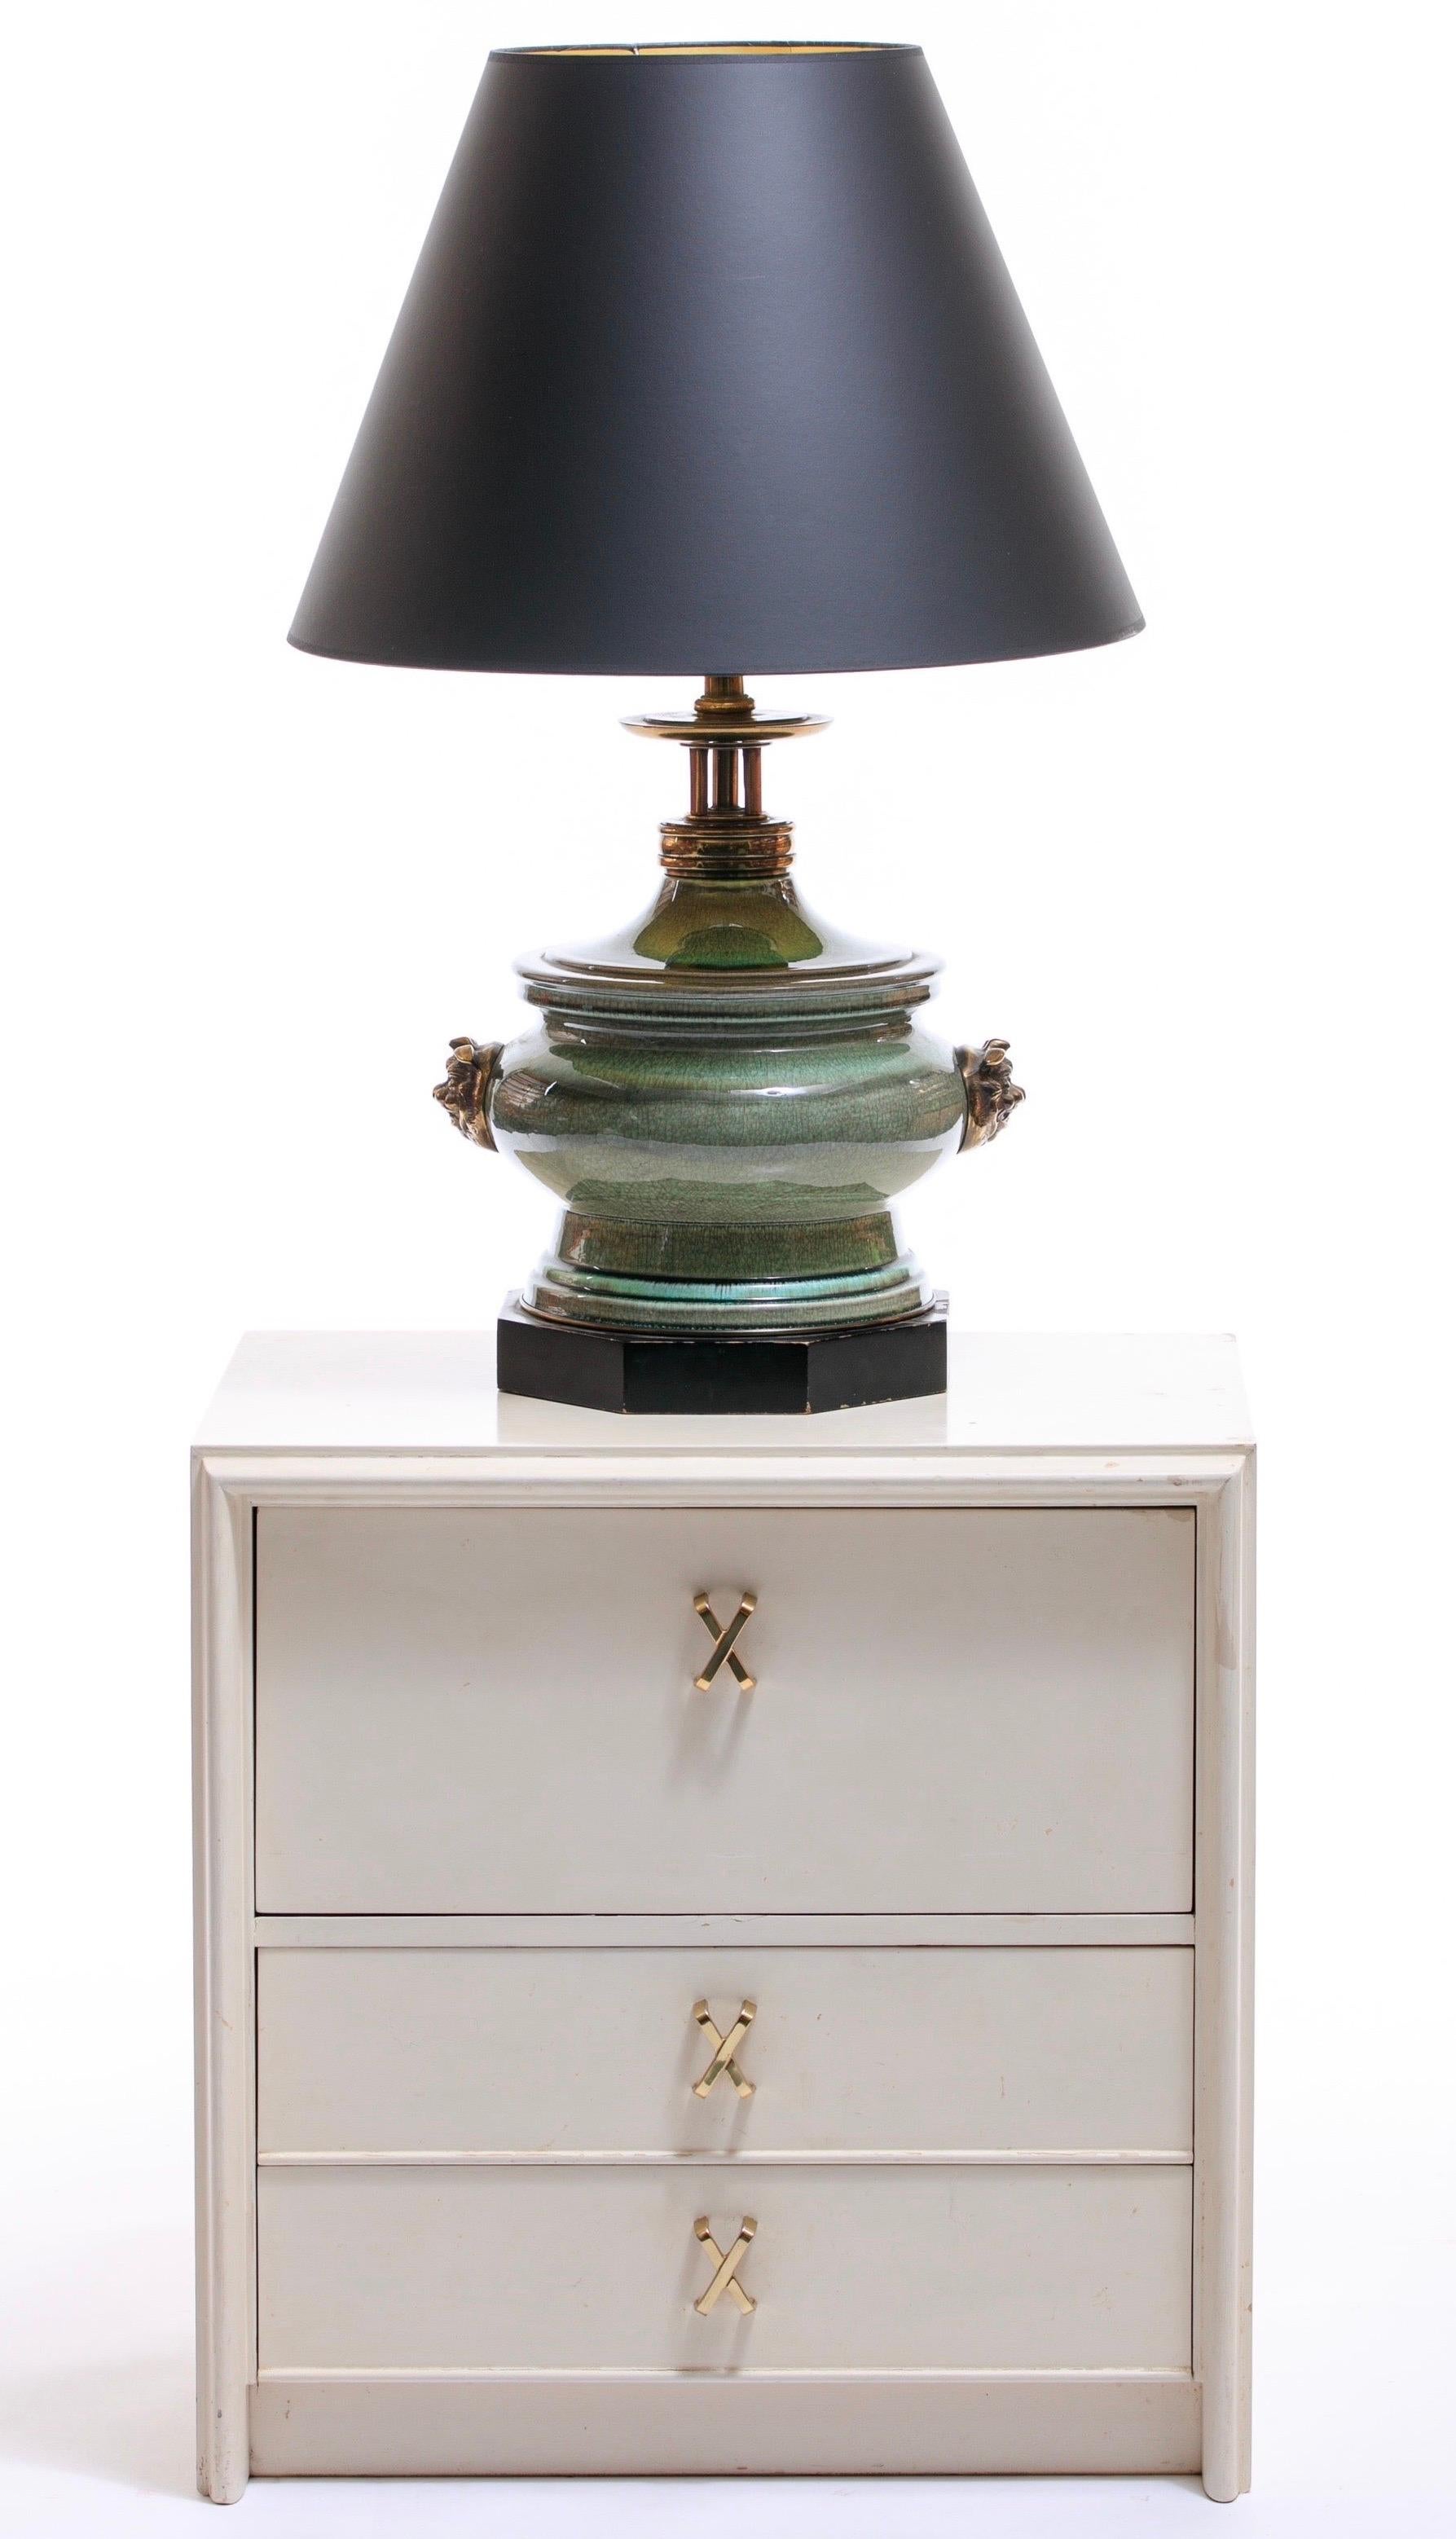 Everyone loves Paul Frankl furniture. A pillar of design, he created some of the most iconic midcentury pieces of furniture. And here we have a lovely pair of Paul Frankl ivory lacquered nightstands from Frankl's Debonair Collection for Johnson